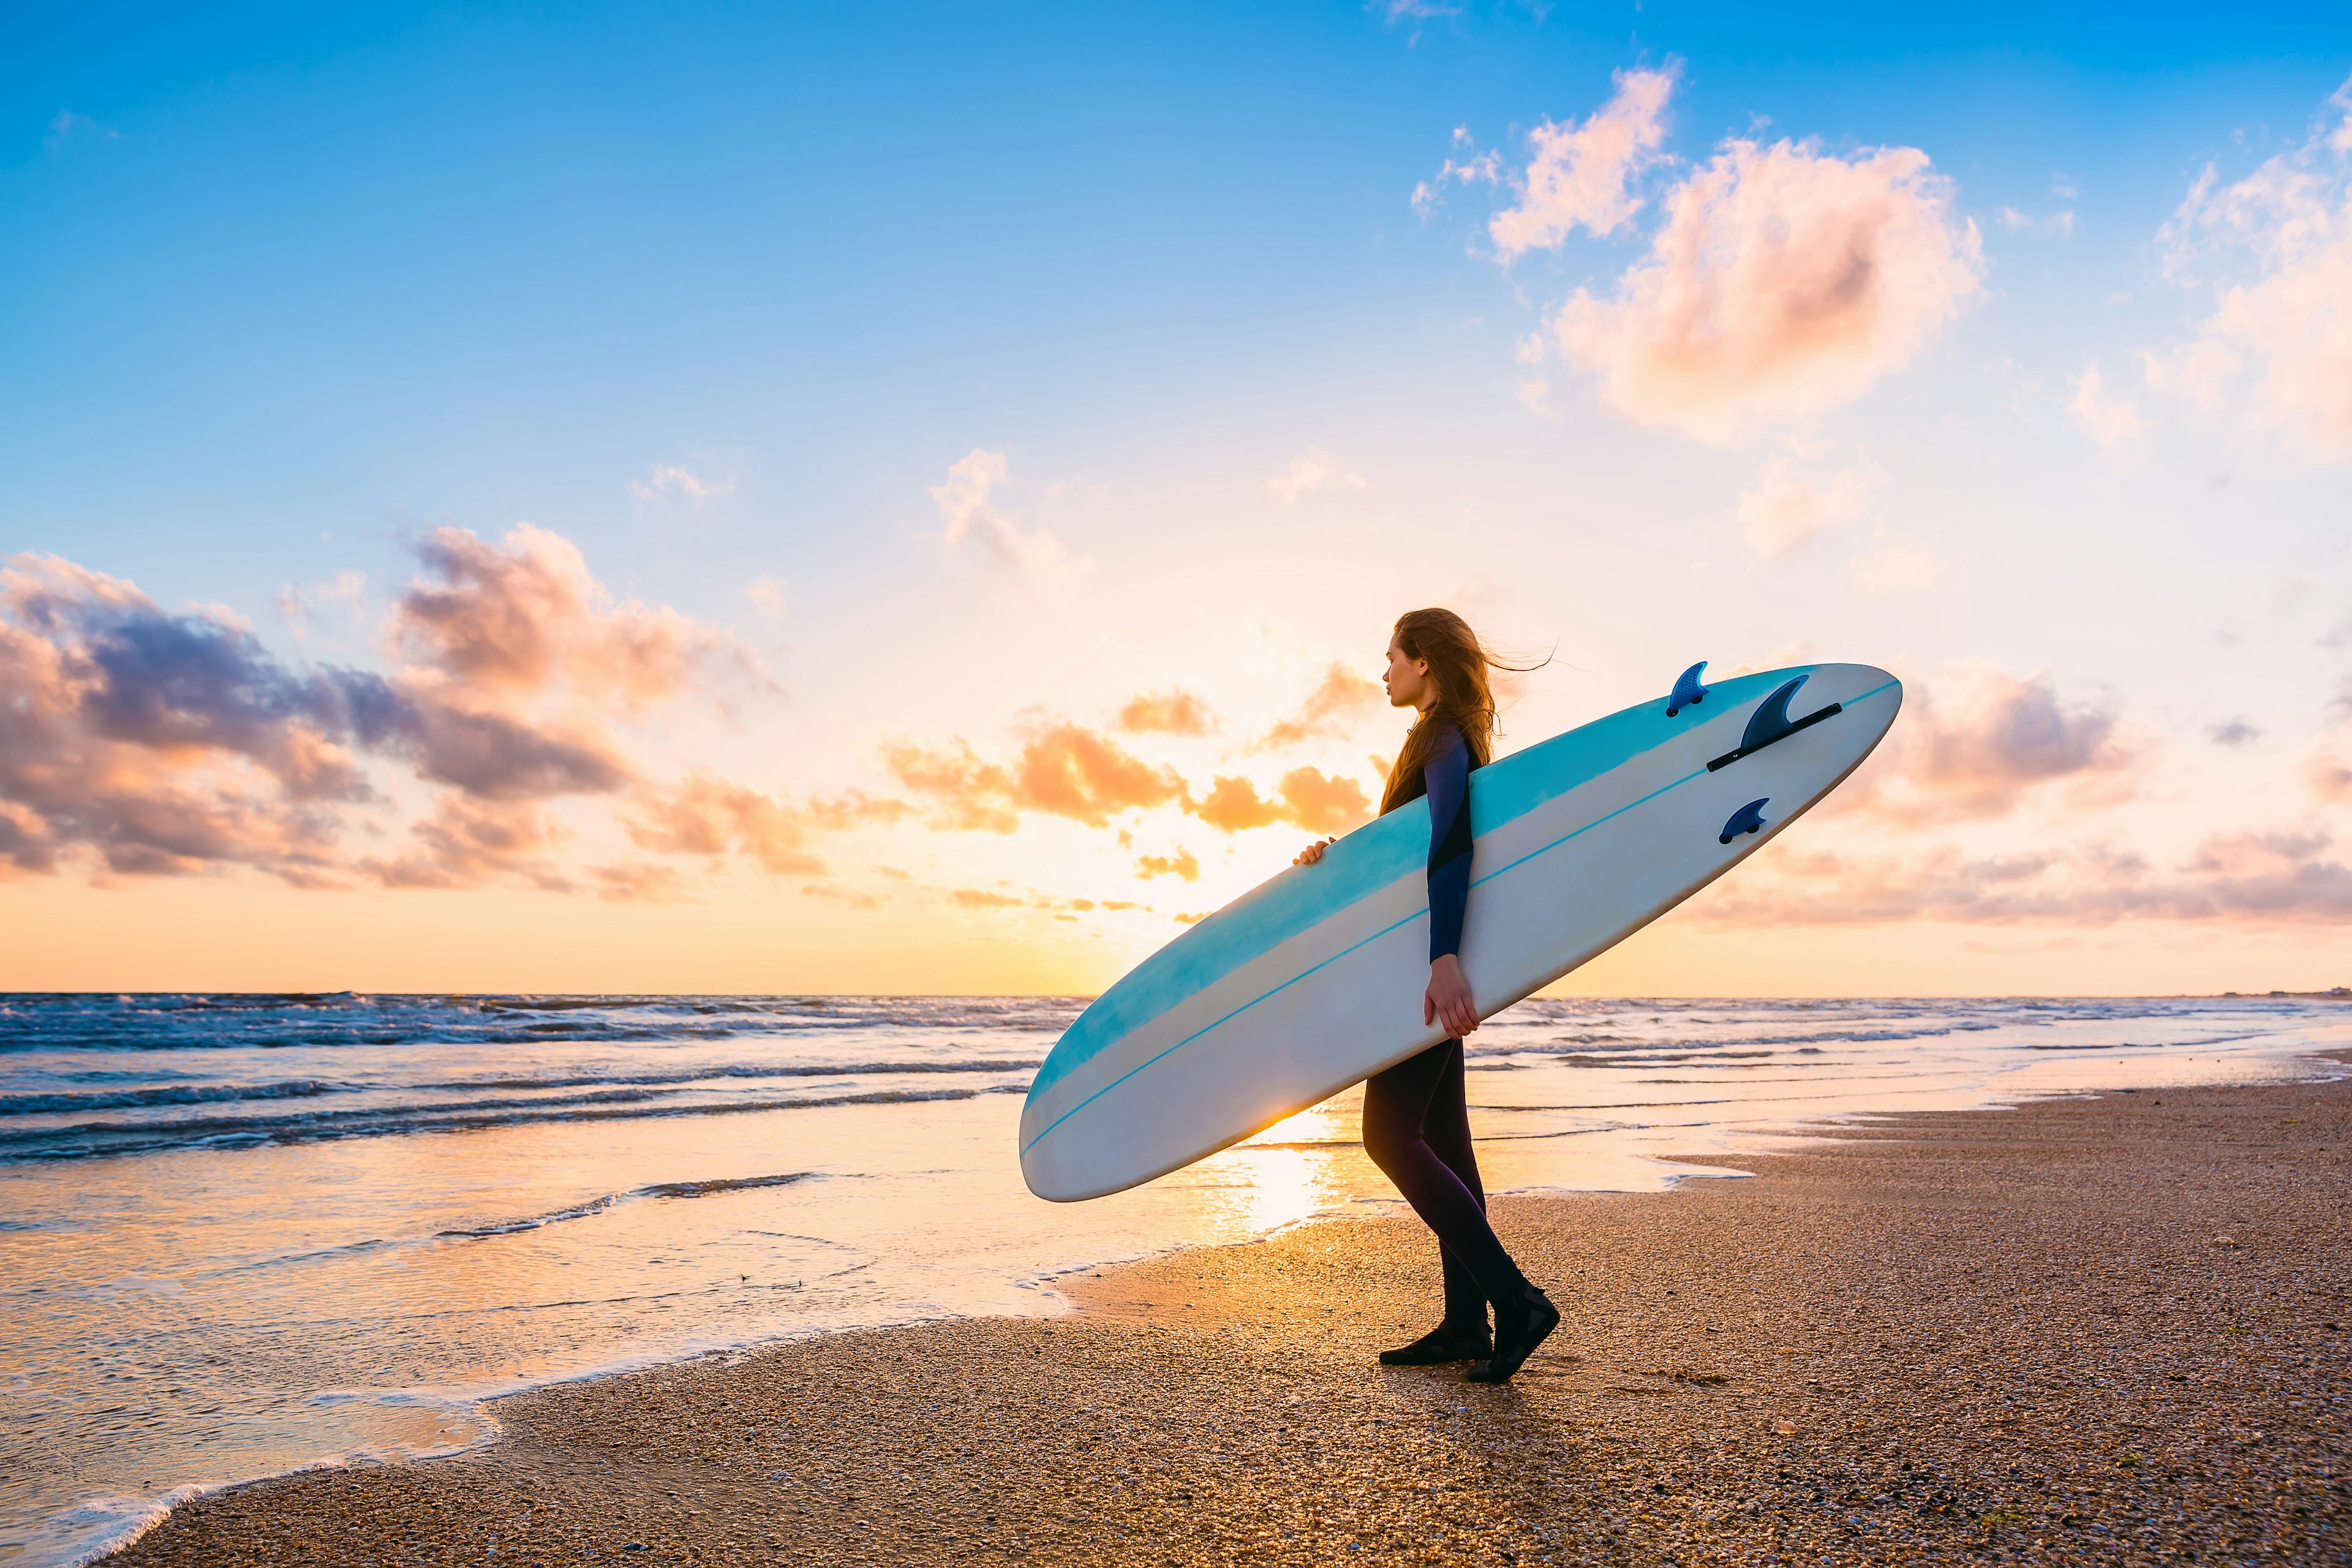 Surf girl holding surfboard at sunset or sunrise and ocean.